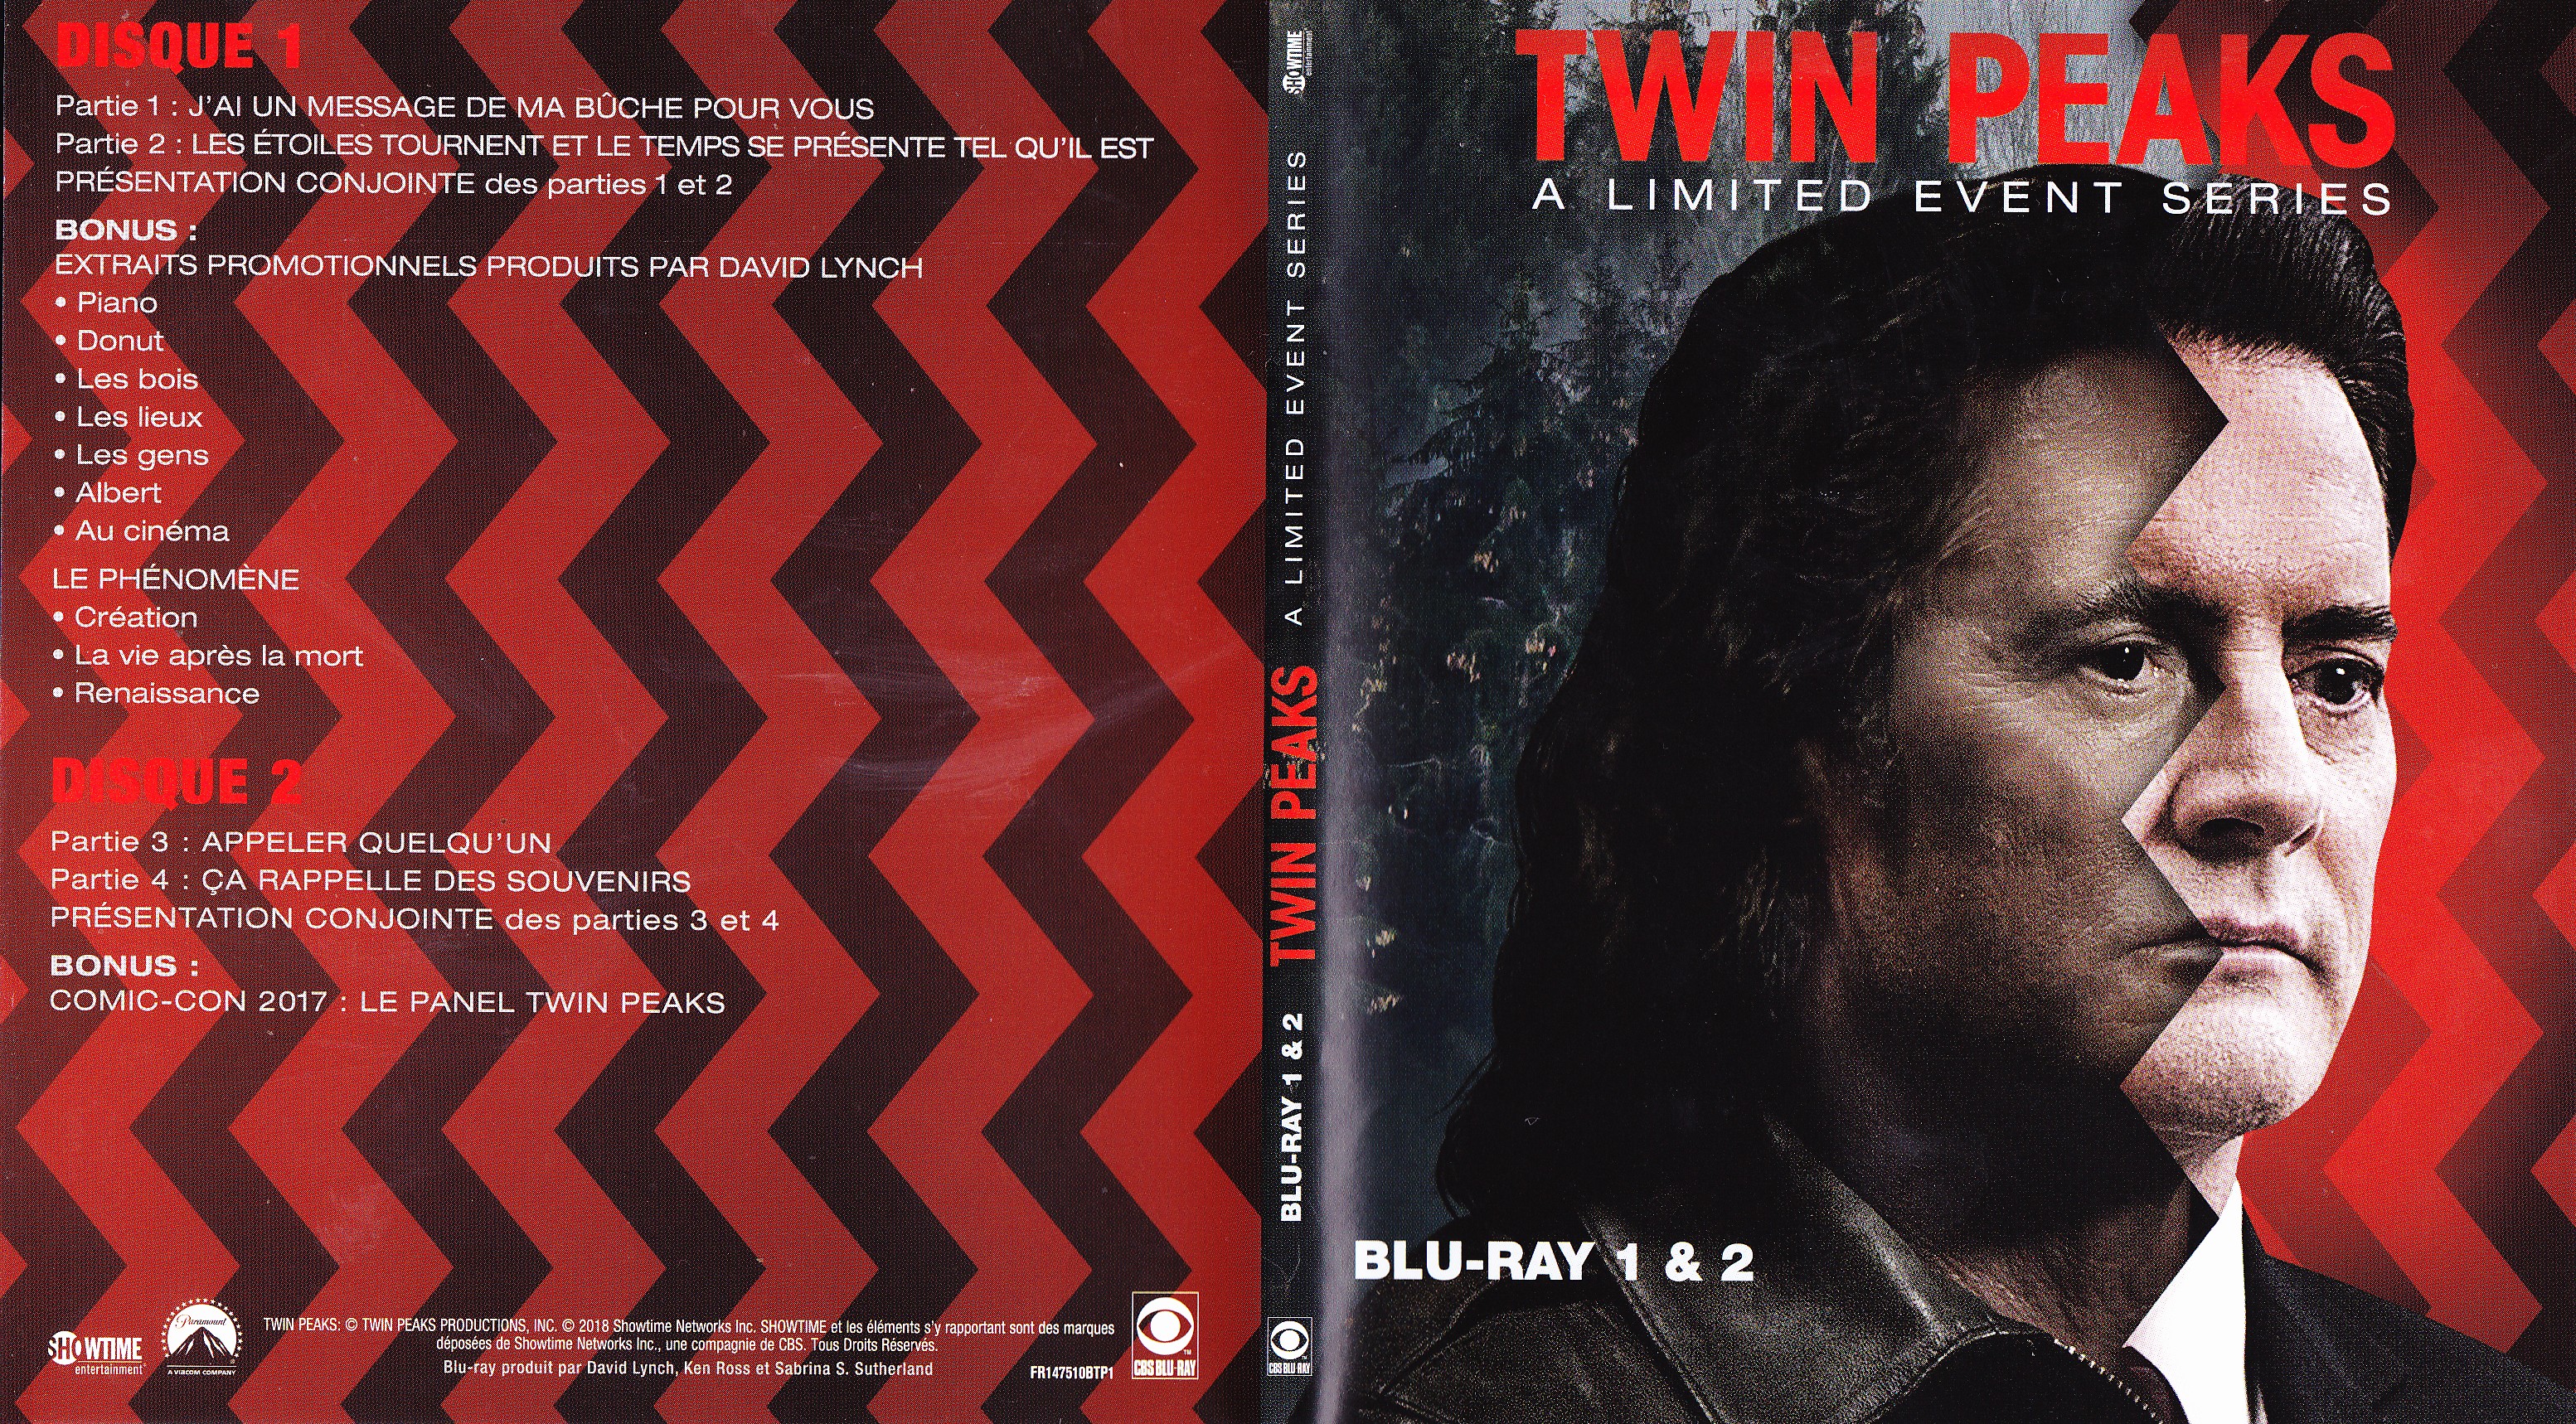 Jaquette DVD Twin Peaks A limited event series (BLU-RAY)